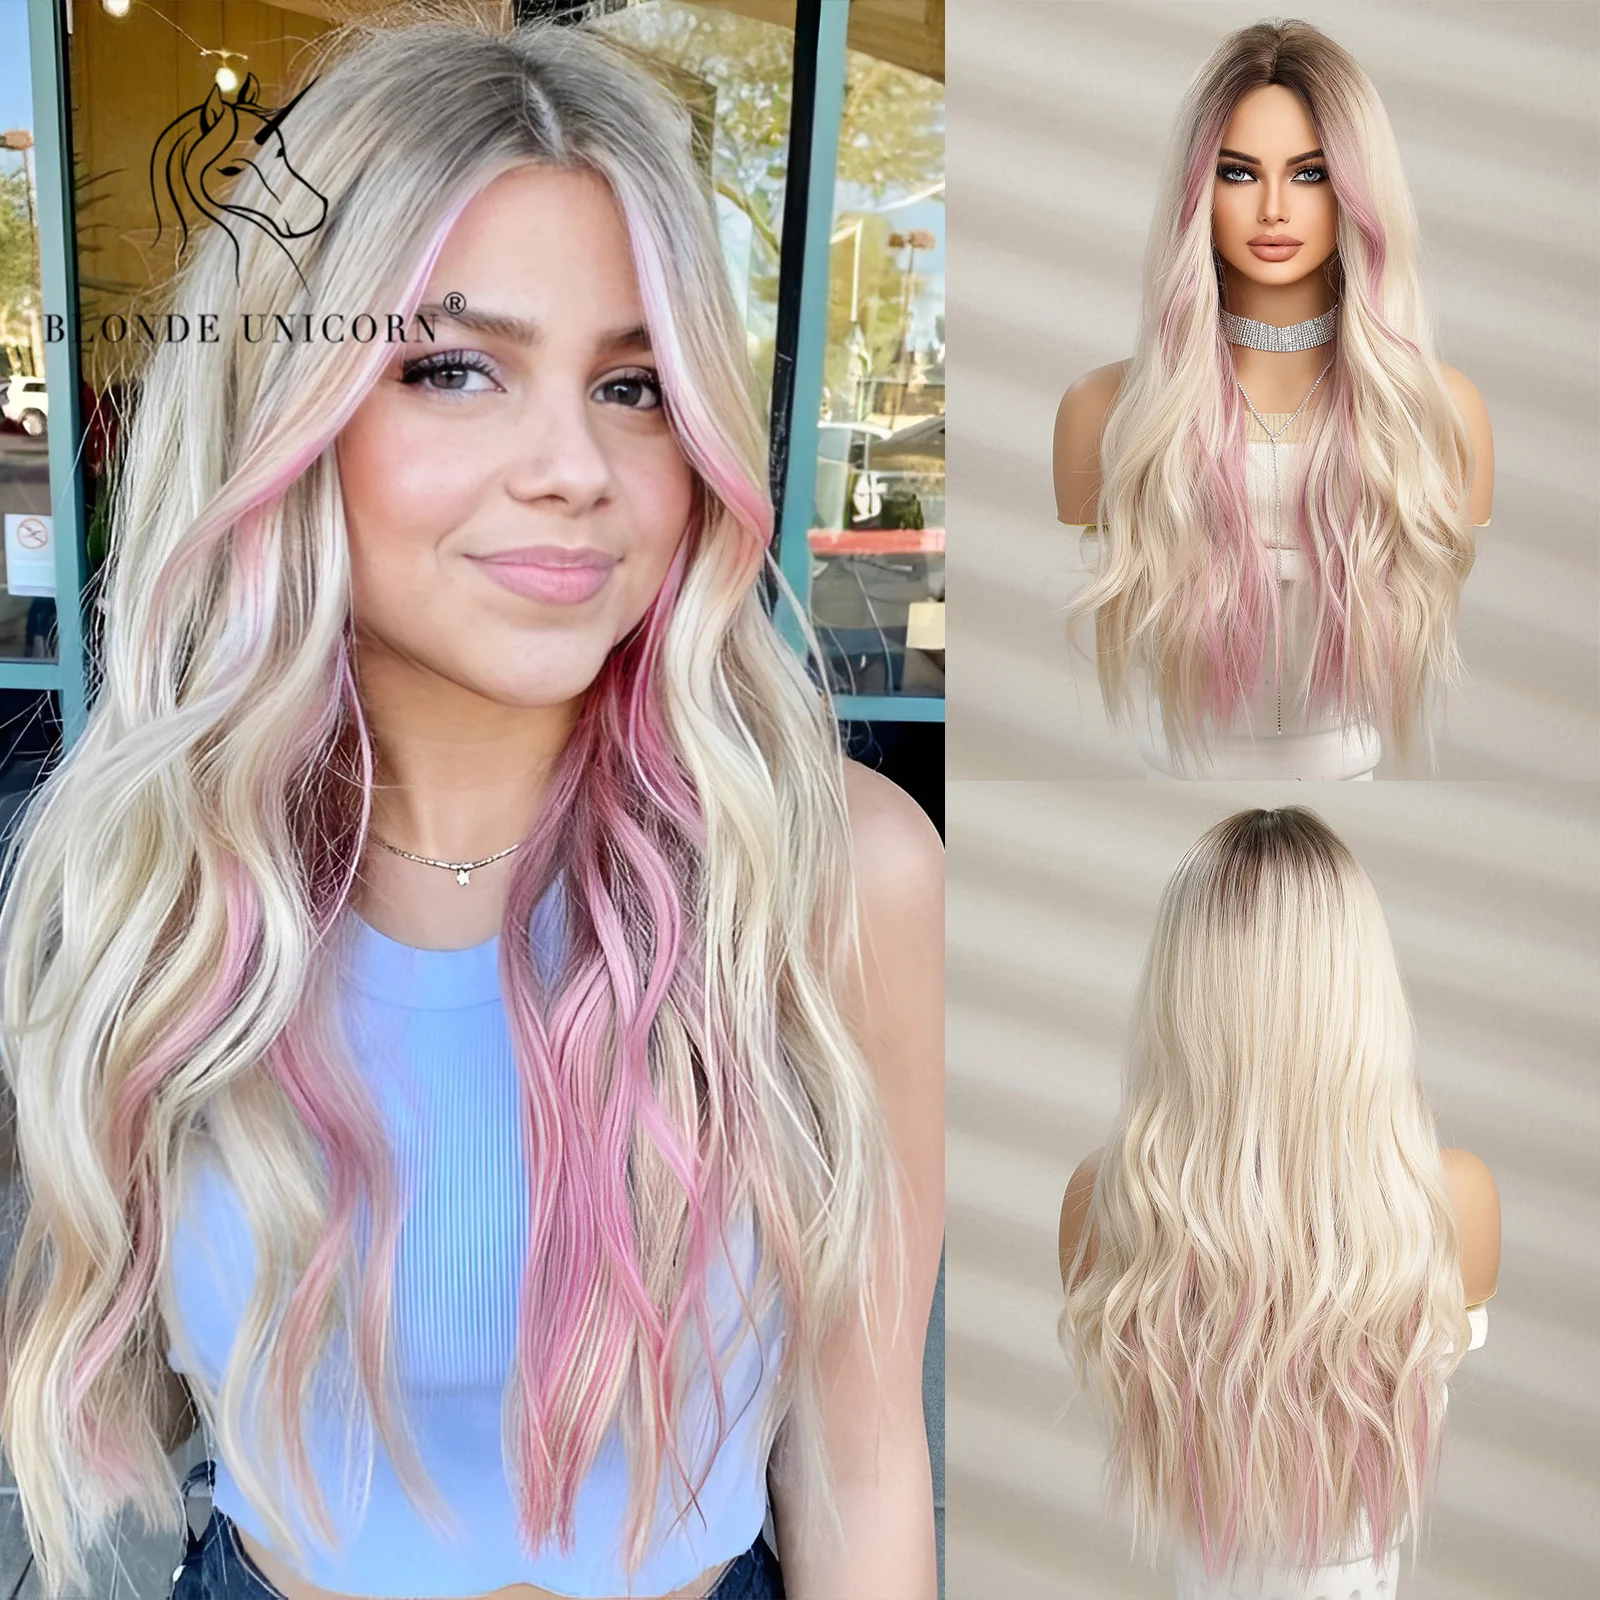 

Blonde Unicorn Synthetic Ombre Brown Mixed Pink Blond Long Wavy Wigs with Bangs Cosplay Party UseHeat Resistant Fiber for Women